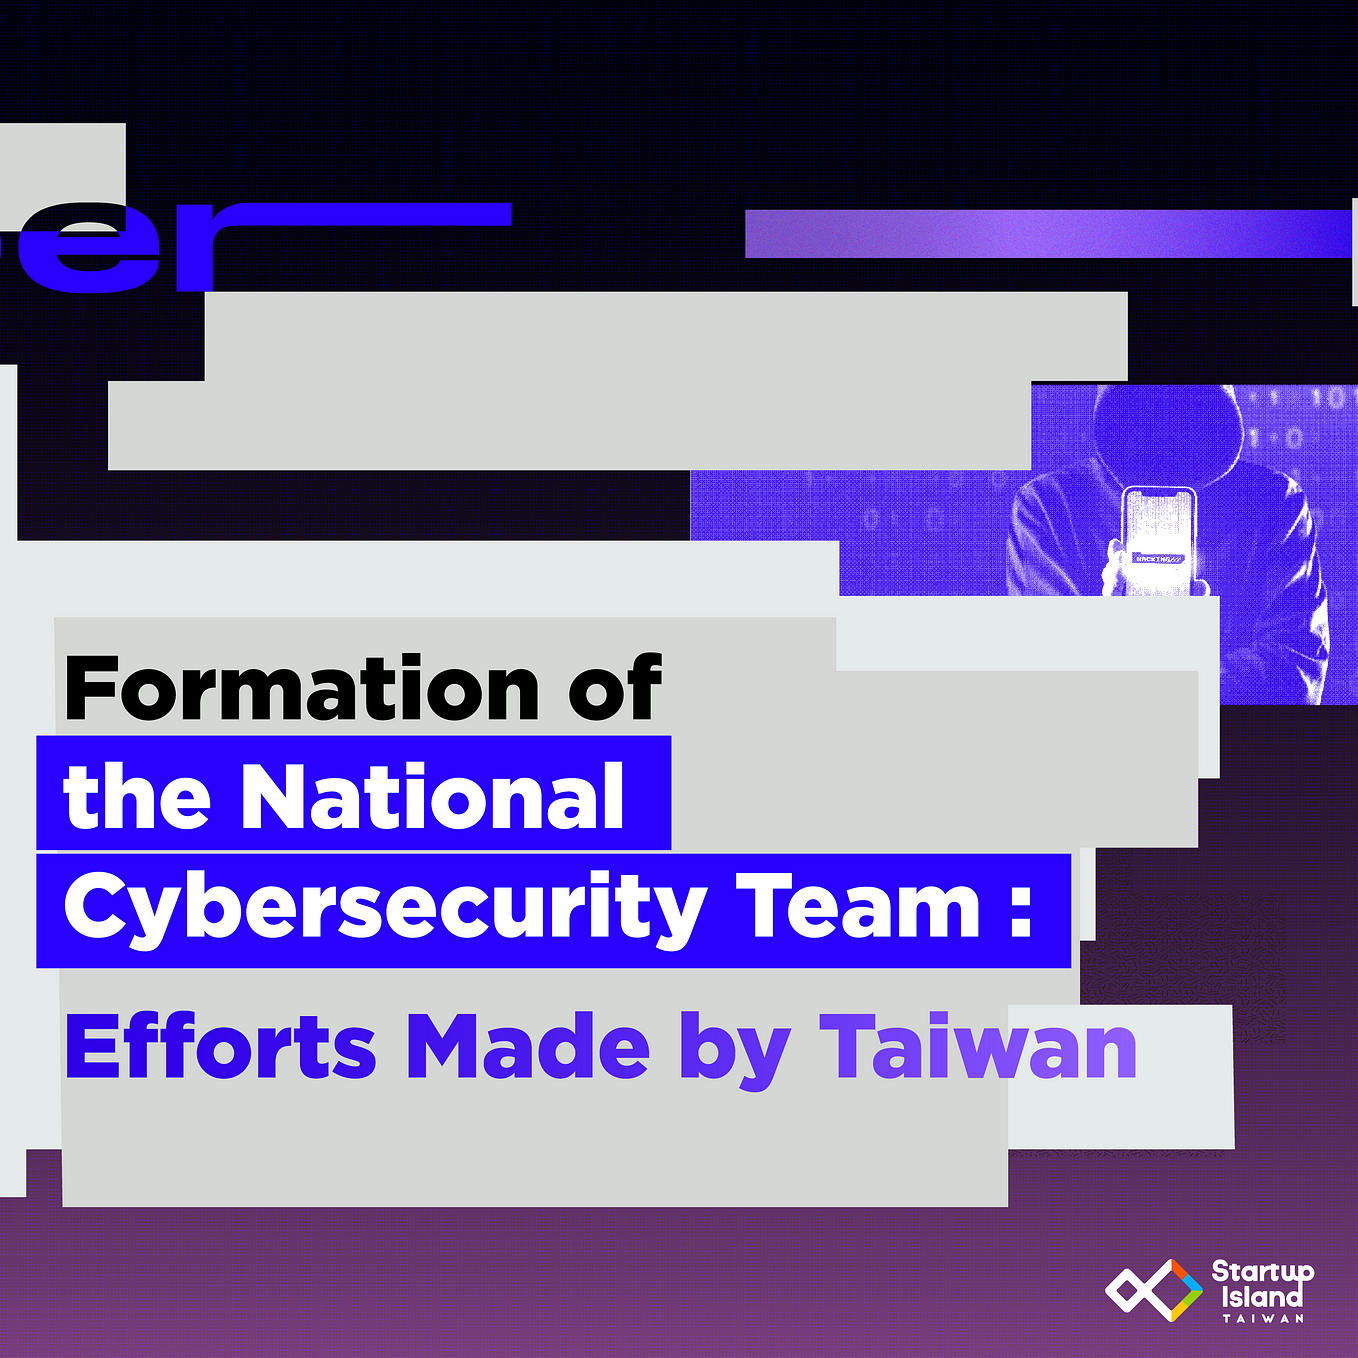 Formation of National Cybersecurity Team: Efforts Made by Taiwan